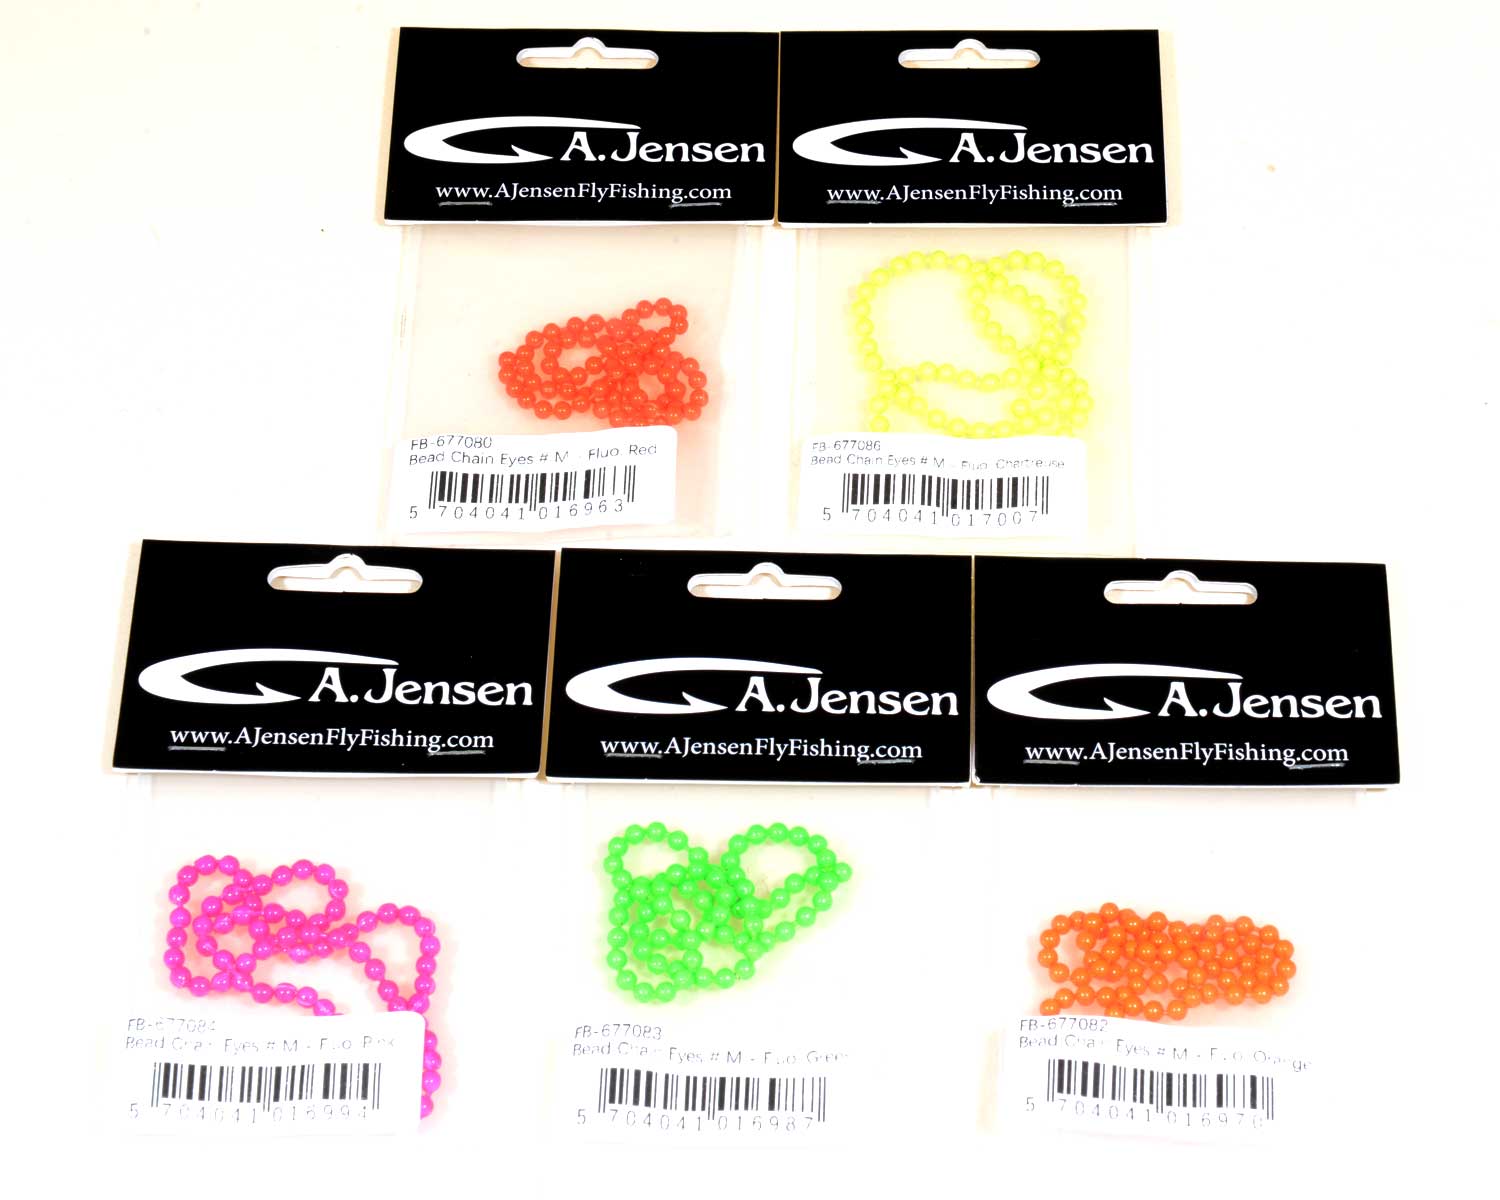 A.Jensen Bead Chain eyes fluo. colors - 1 of each 5 colors